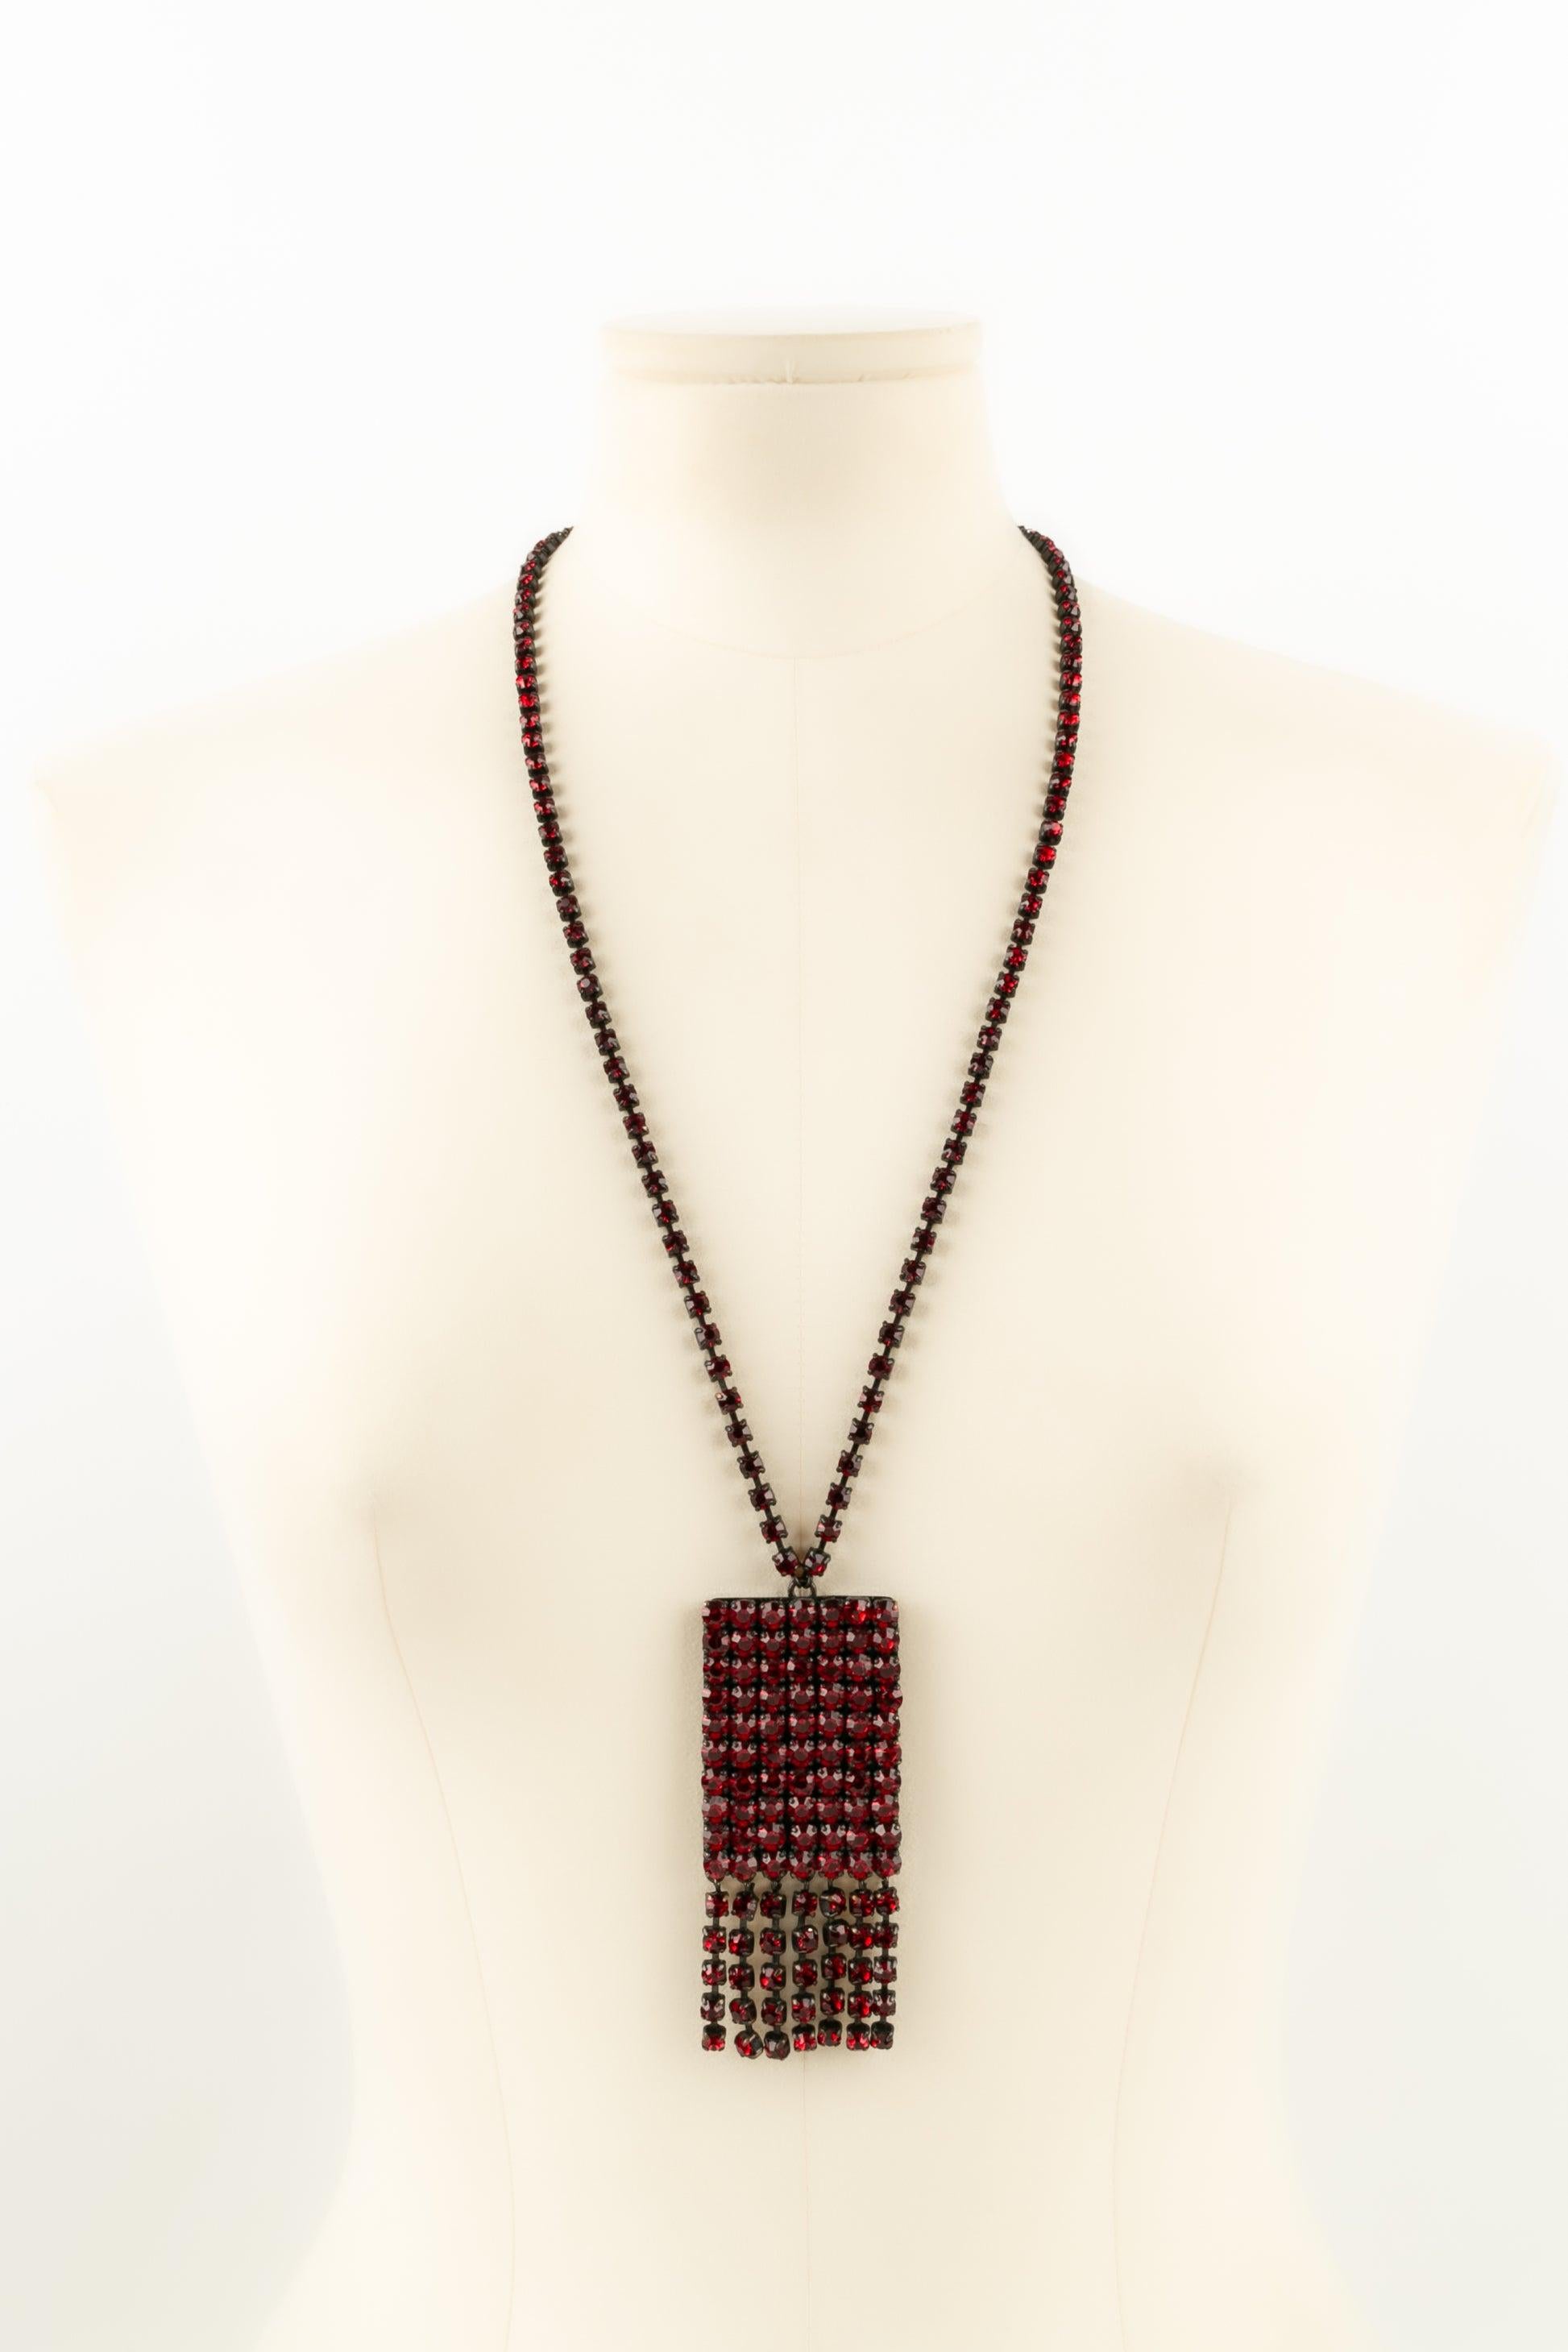 Yves Saint Laurent - Necklace in metal entirely paved with red rhinestones. Work by the atelier Scemama for Yves Saint Laurent.

Additional information:
Condition: Good condition
Dimensions: Length: 70 cm

Seller Reference: BC187